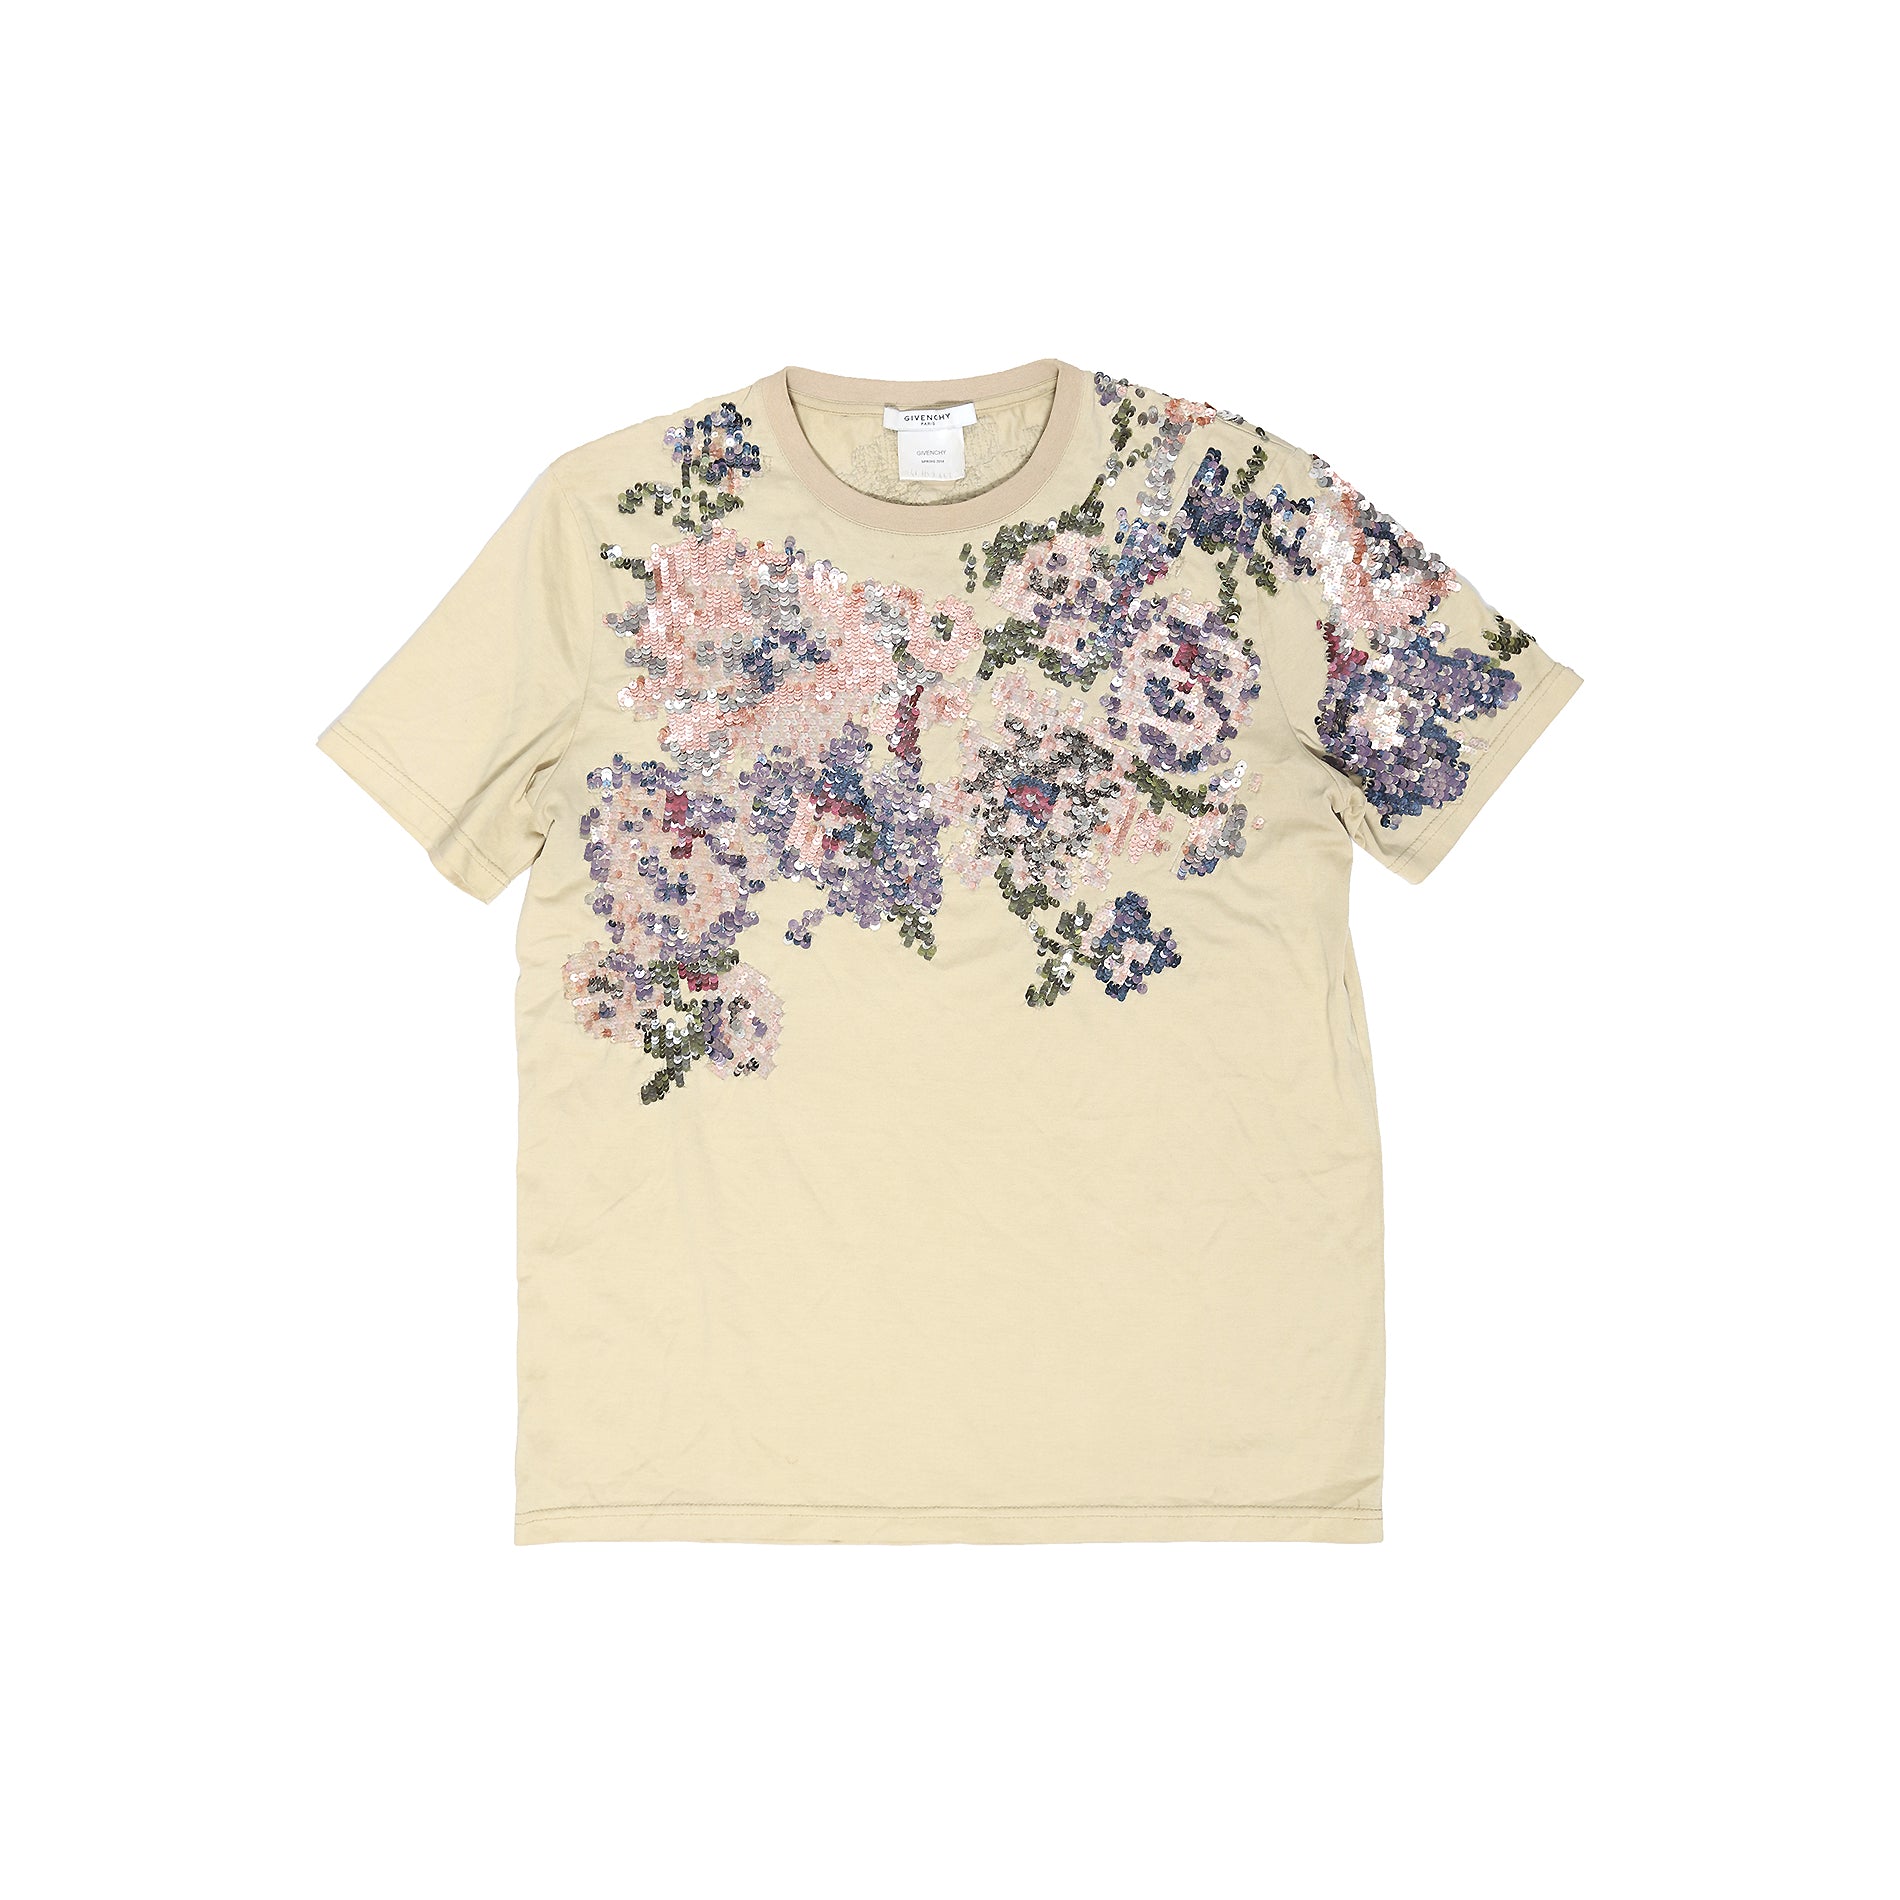 Givenchy SS14 Floral Sequin T-Shirt